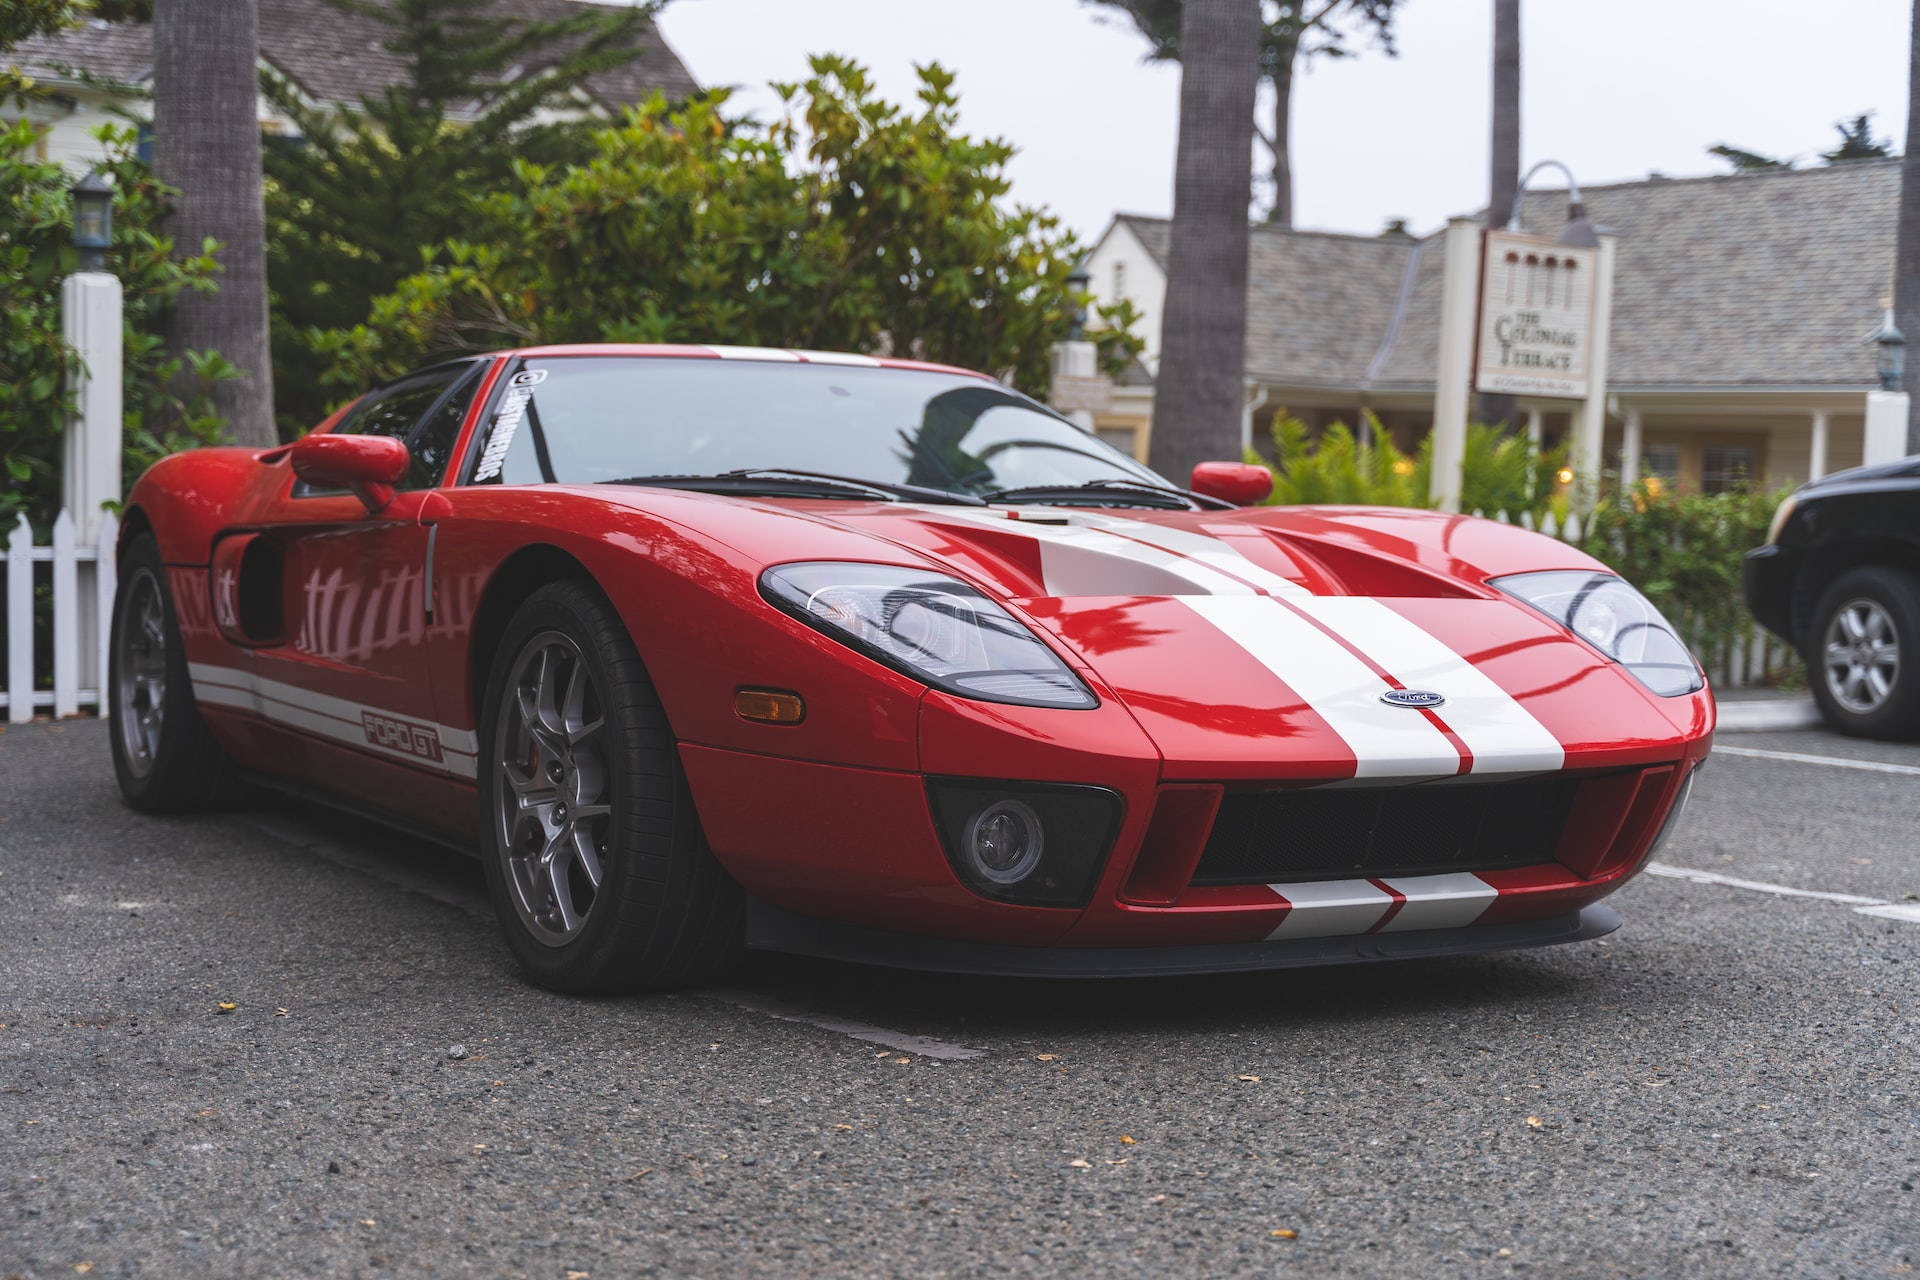 Scarlet-colored Ford Gt